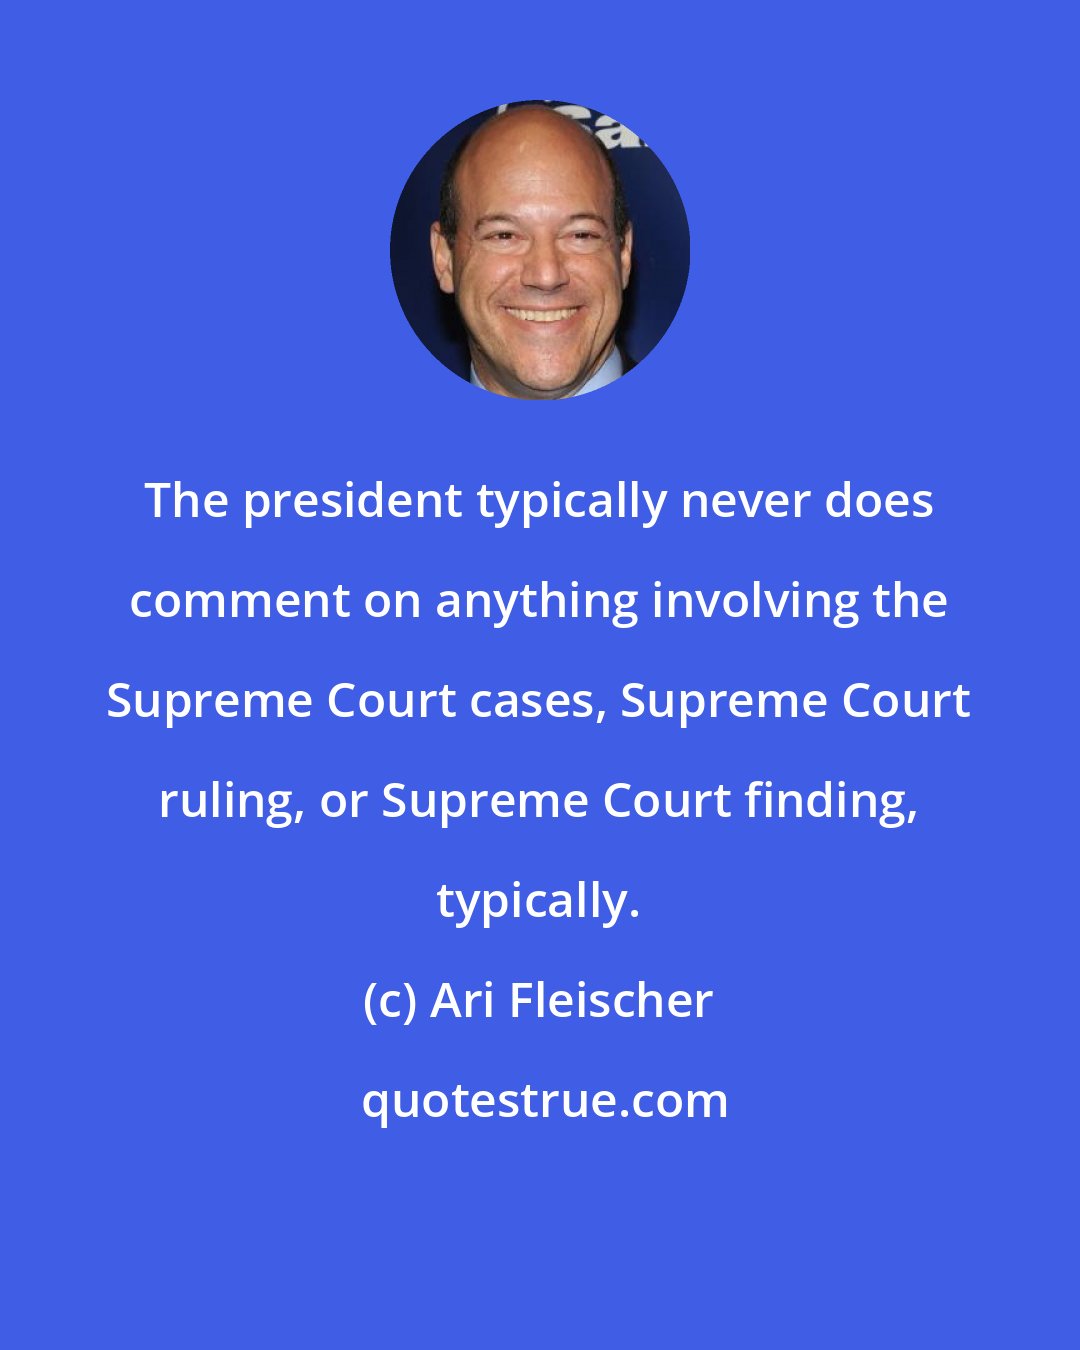 Ari Fleischer: The president typically never does comment on anything involving the Supreme Court cases, Supreme Court ruling, or Supreme Court finding, typically.